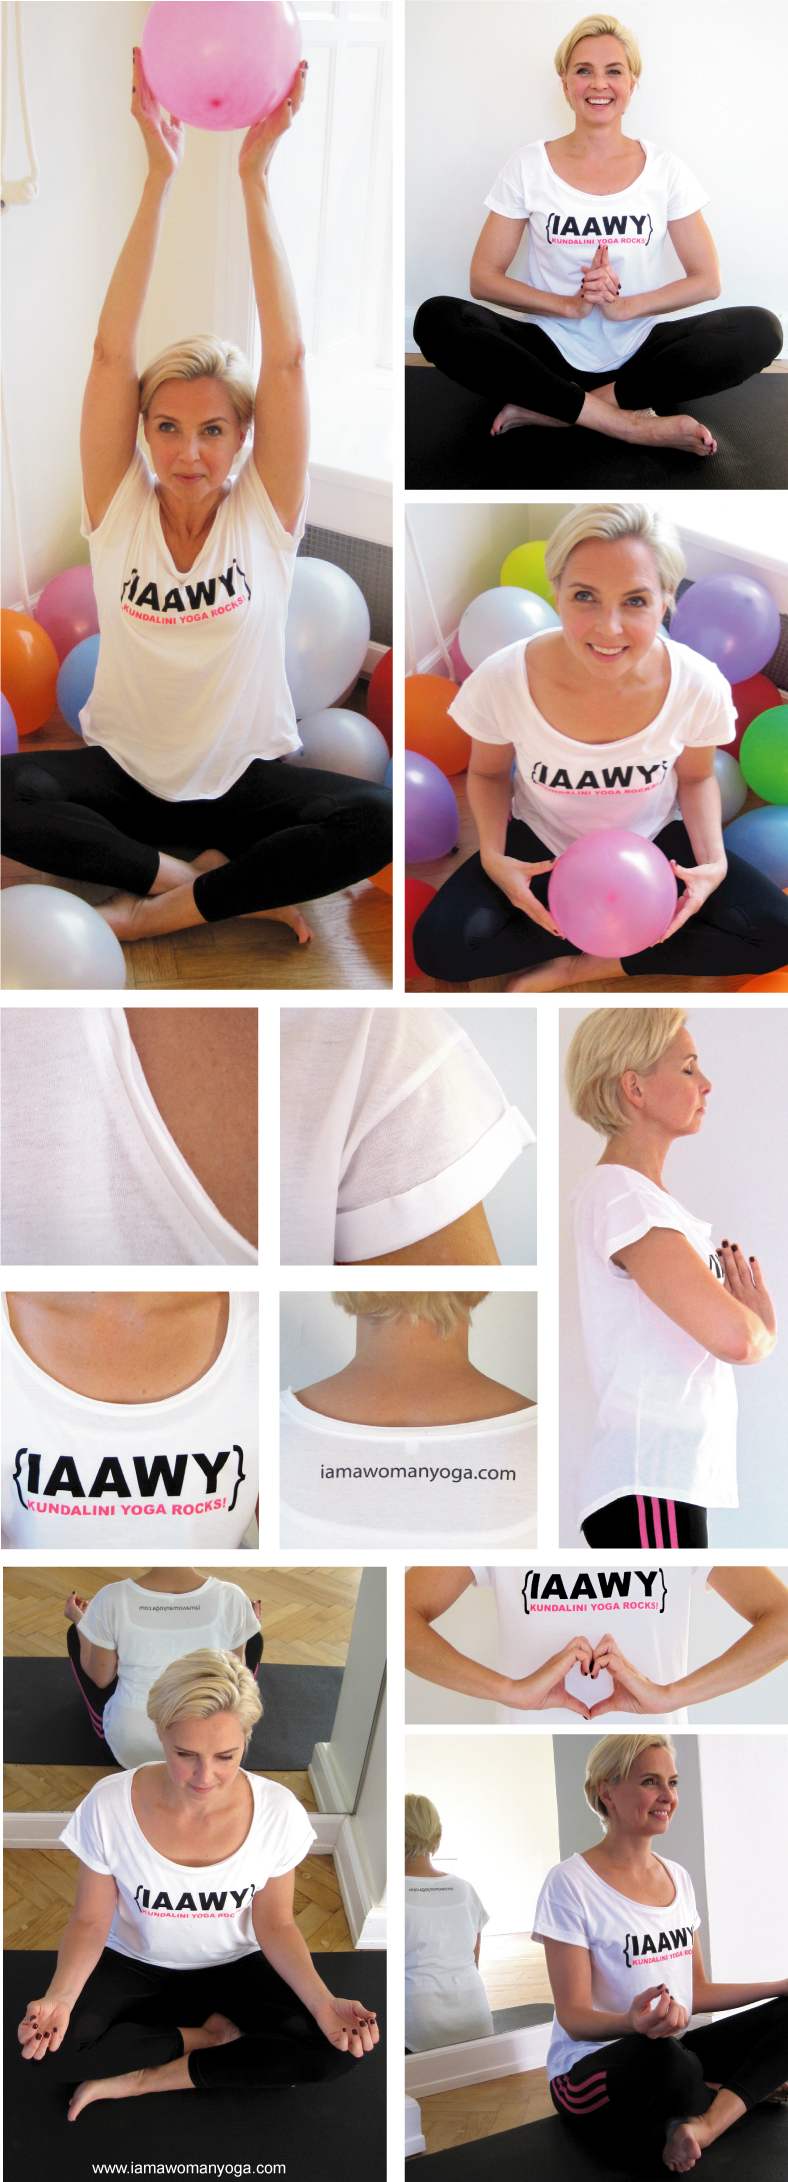 IAAWY_tshirt_collage_mette_tost